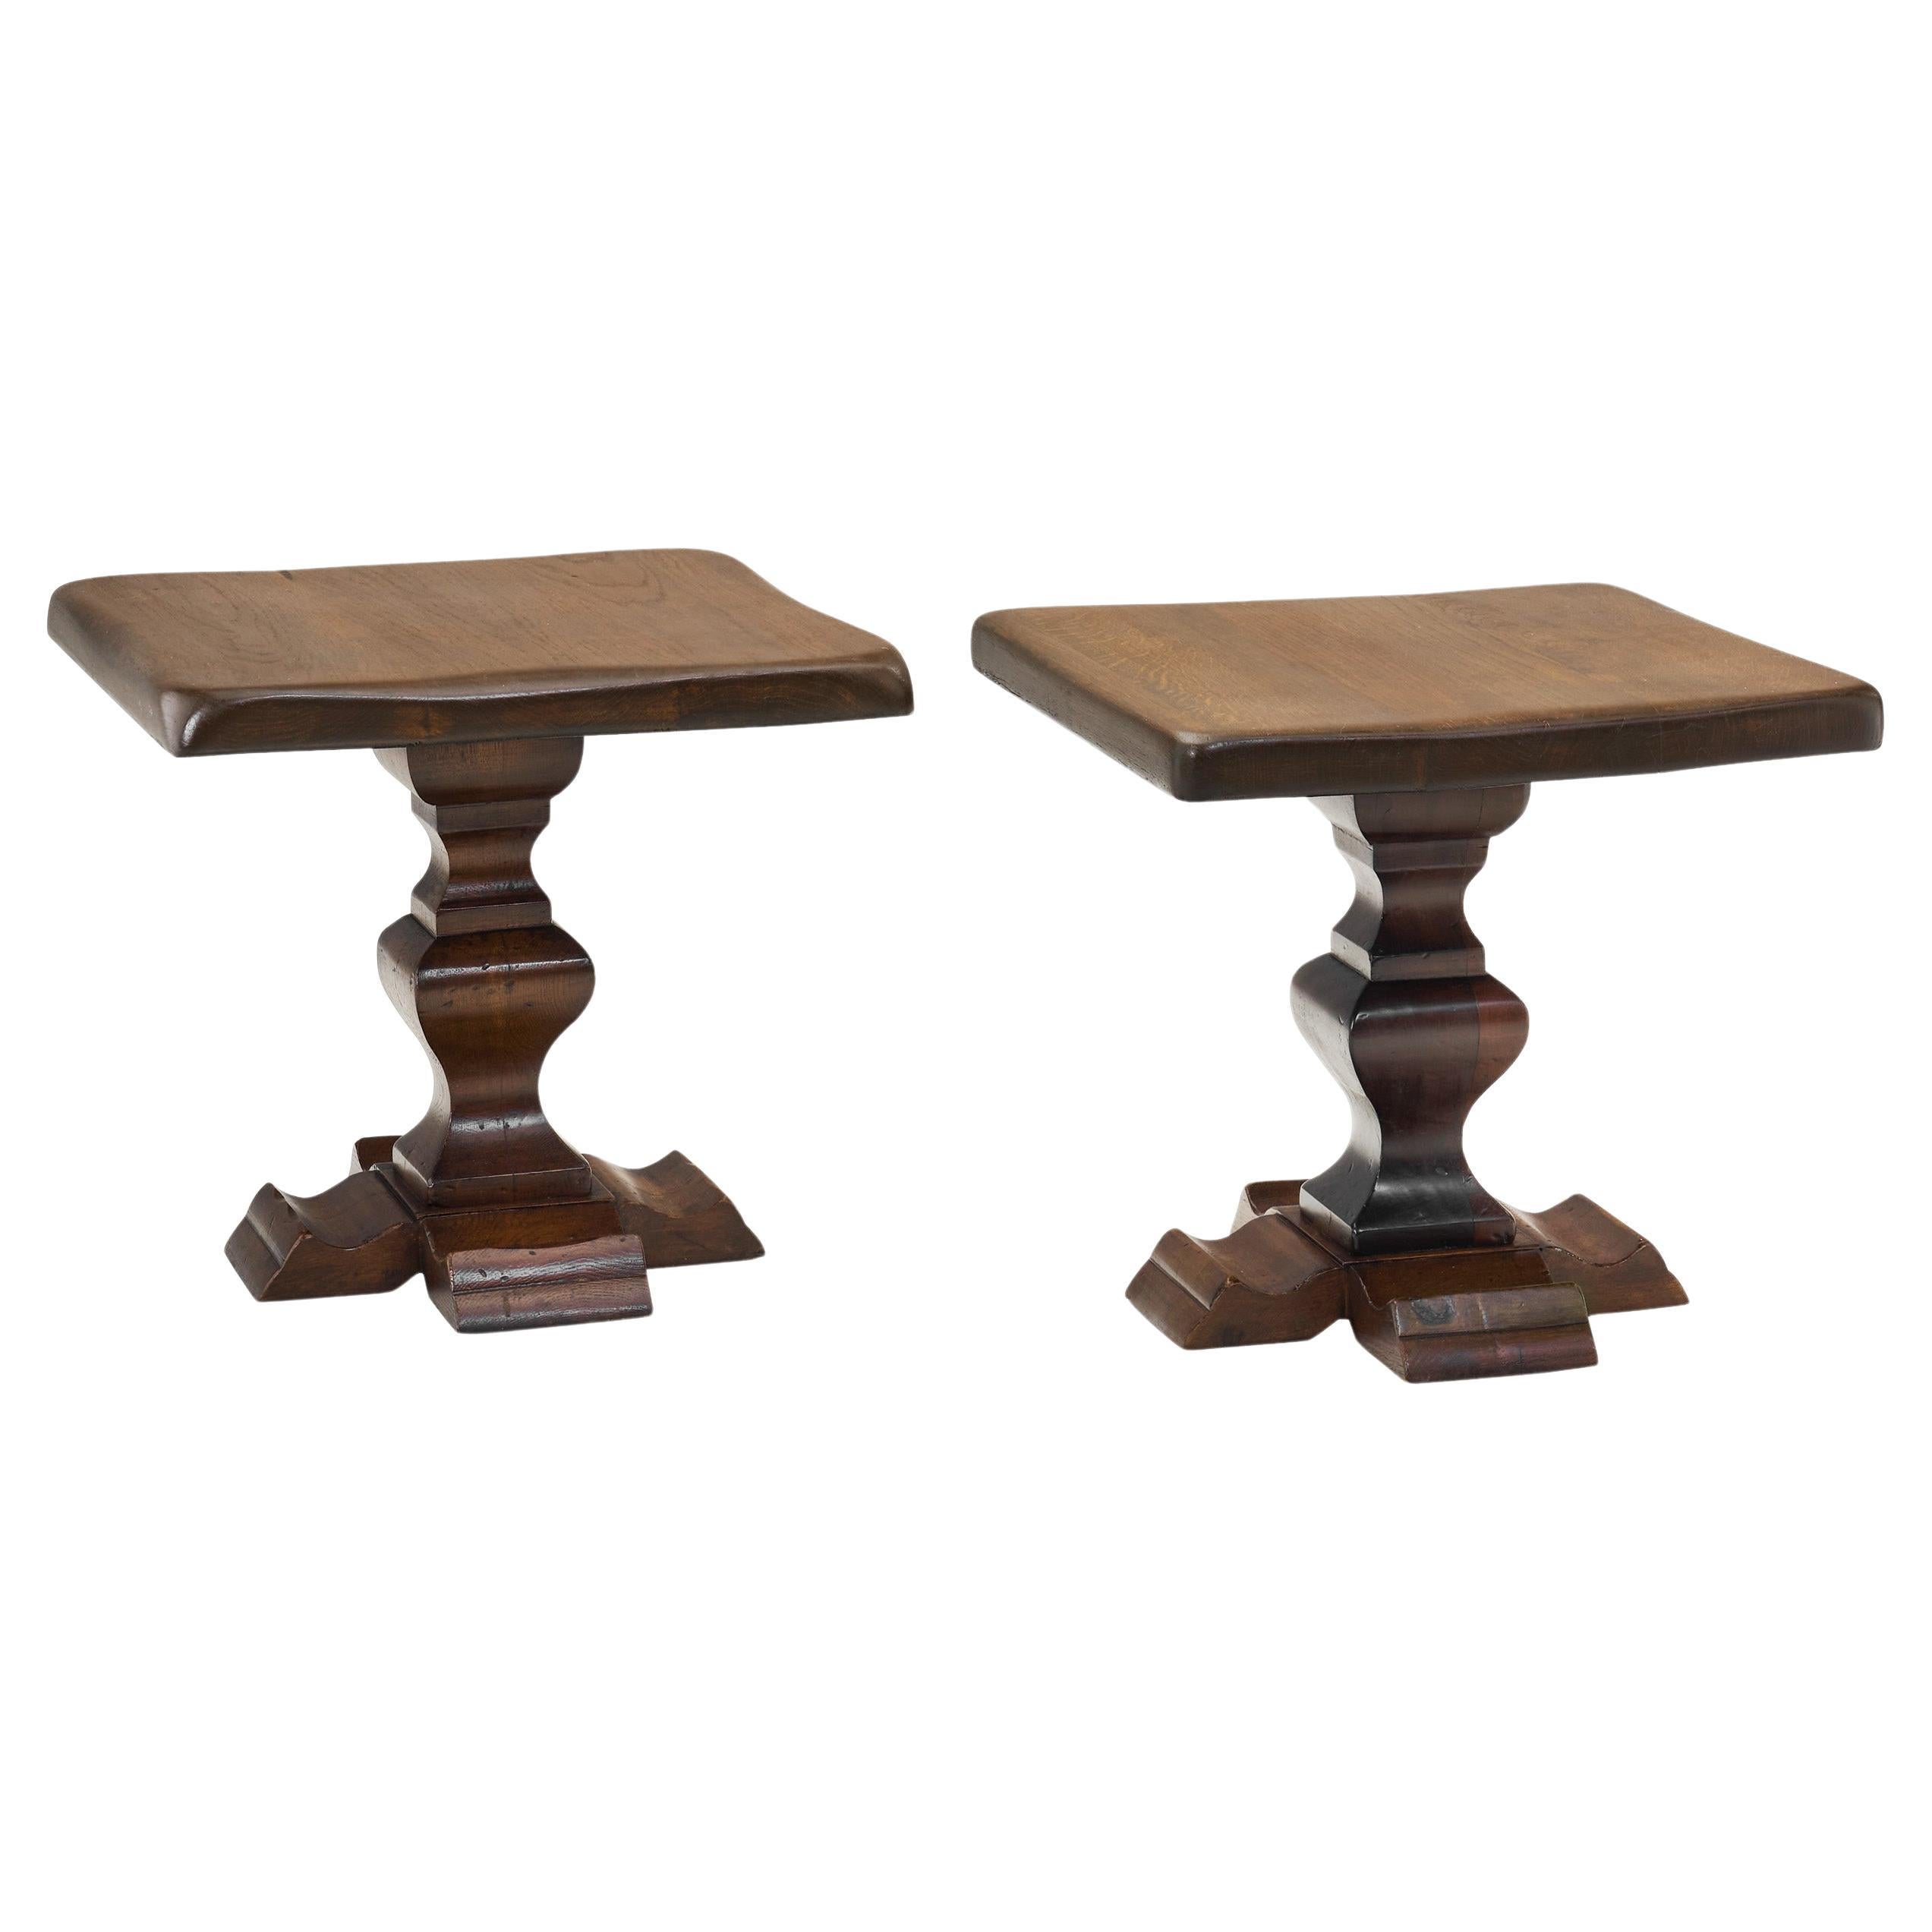 Set of Two Handcrafted Wood Side Tables, Europe 1970s